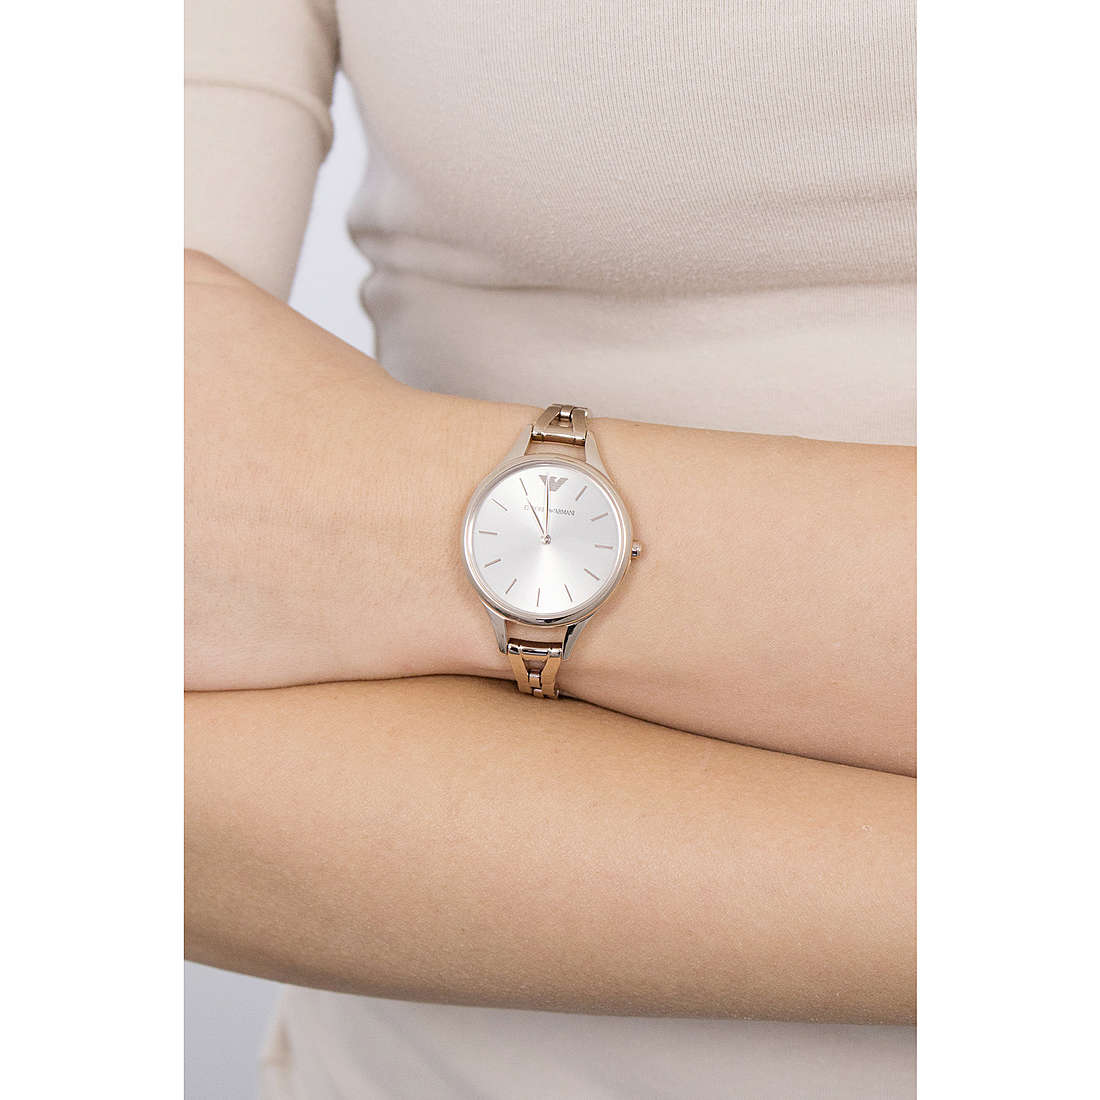 Emporio Armani only time woman AR11055 wearing